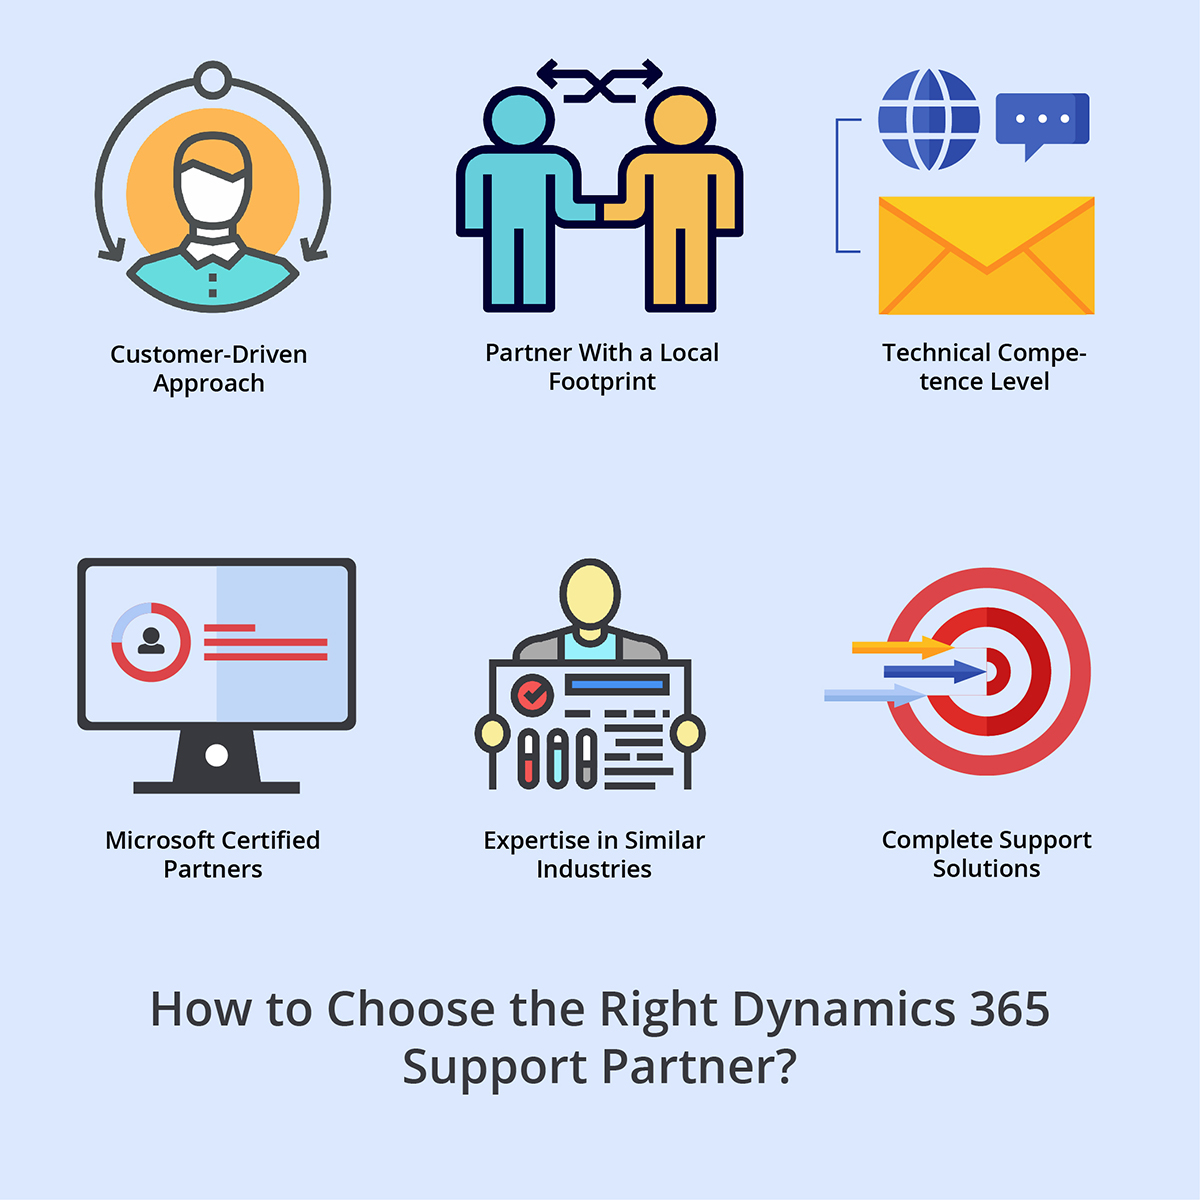 How to Choose the Right Dynamics 365 Support Partner?